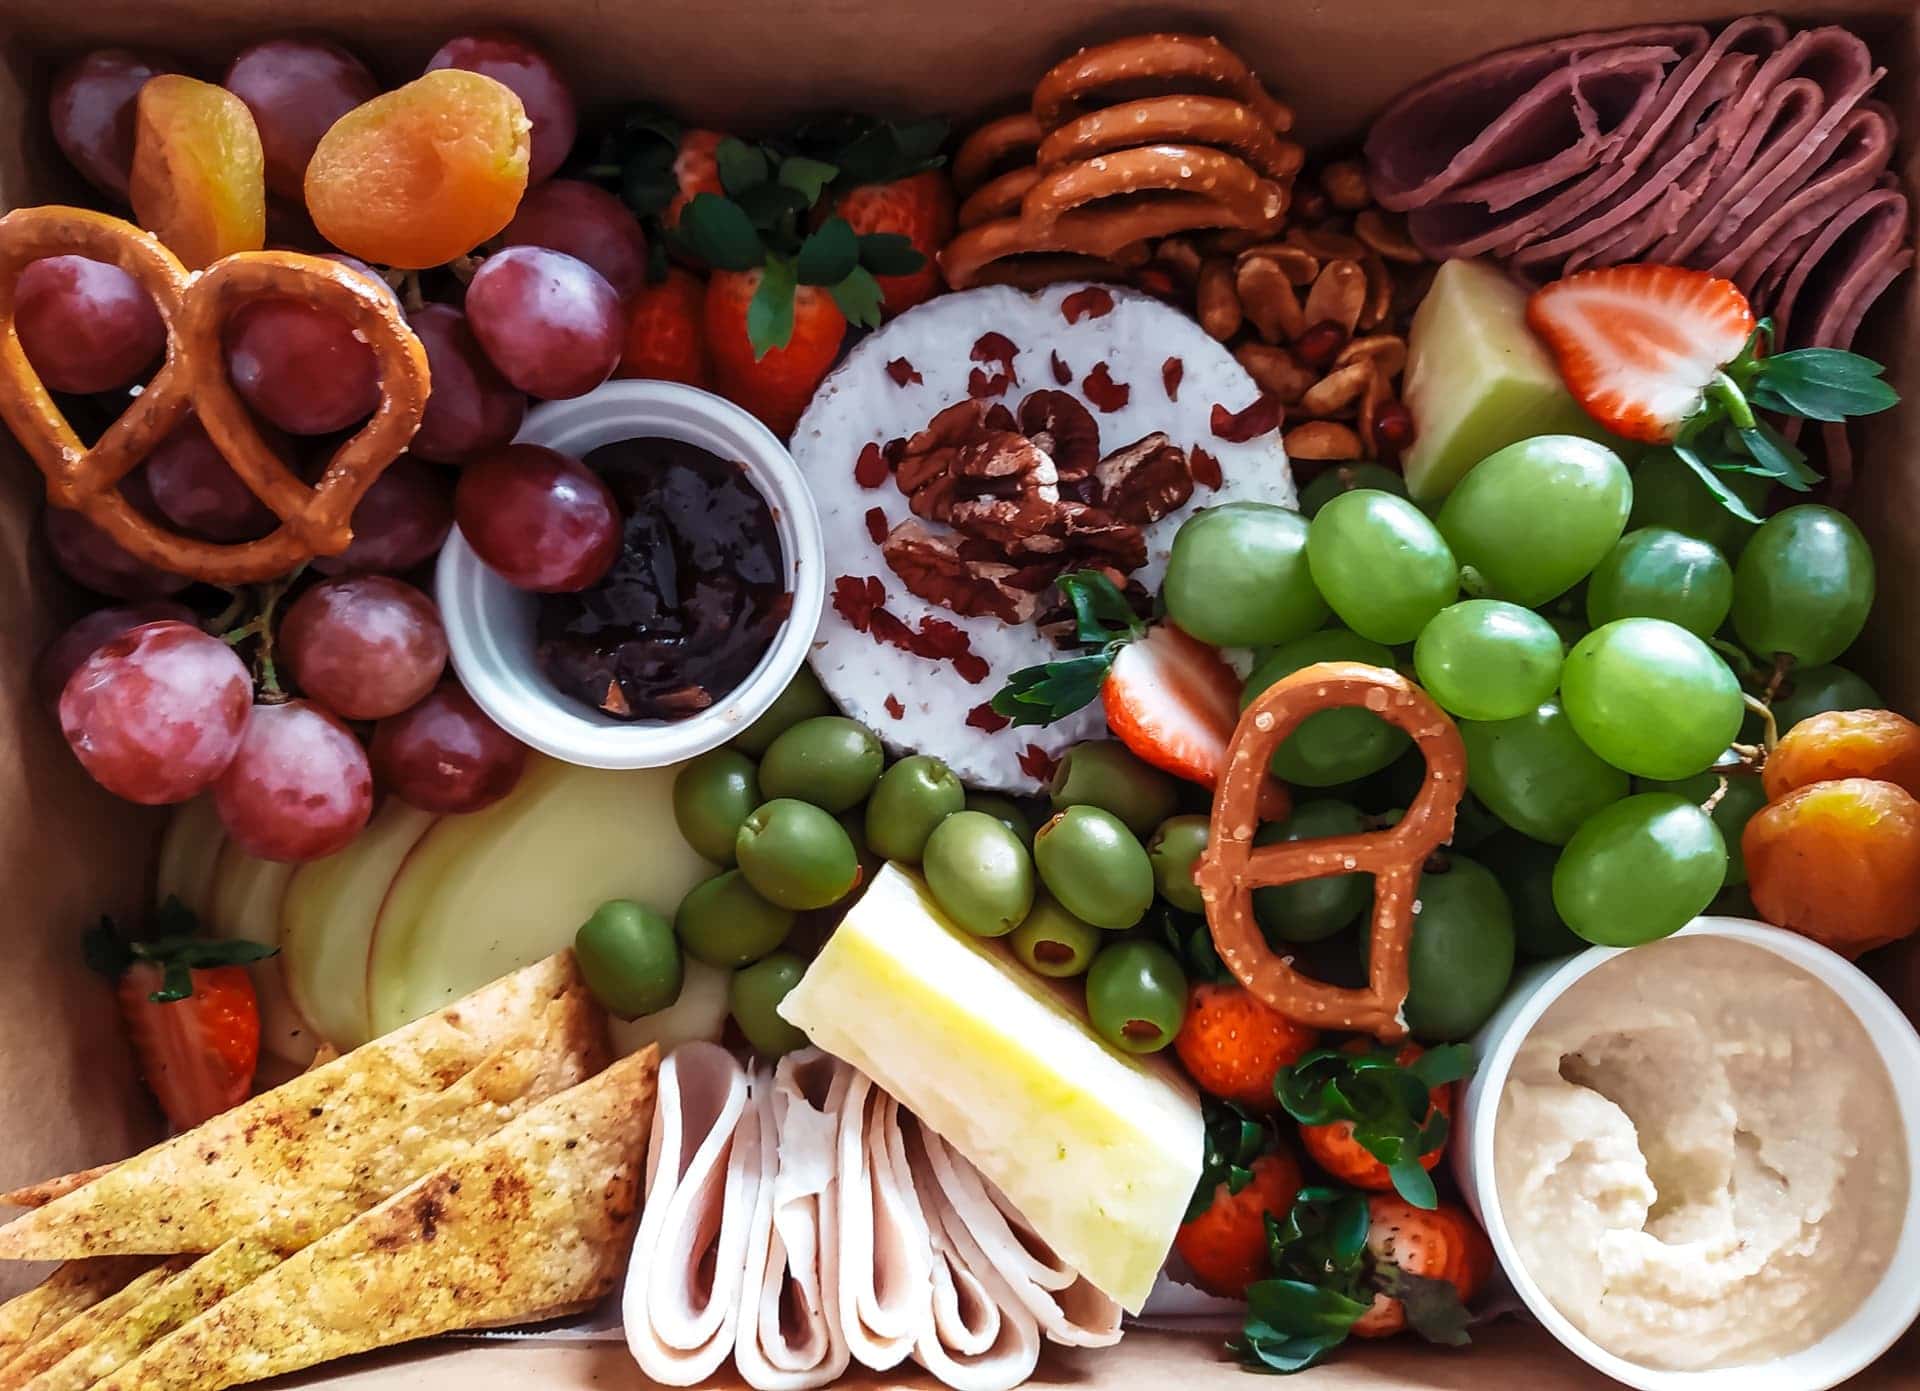 Various snacks such as cheese, grapes, pretzels, and more